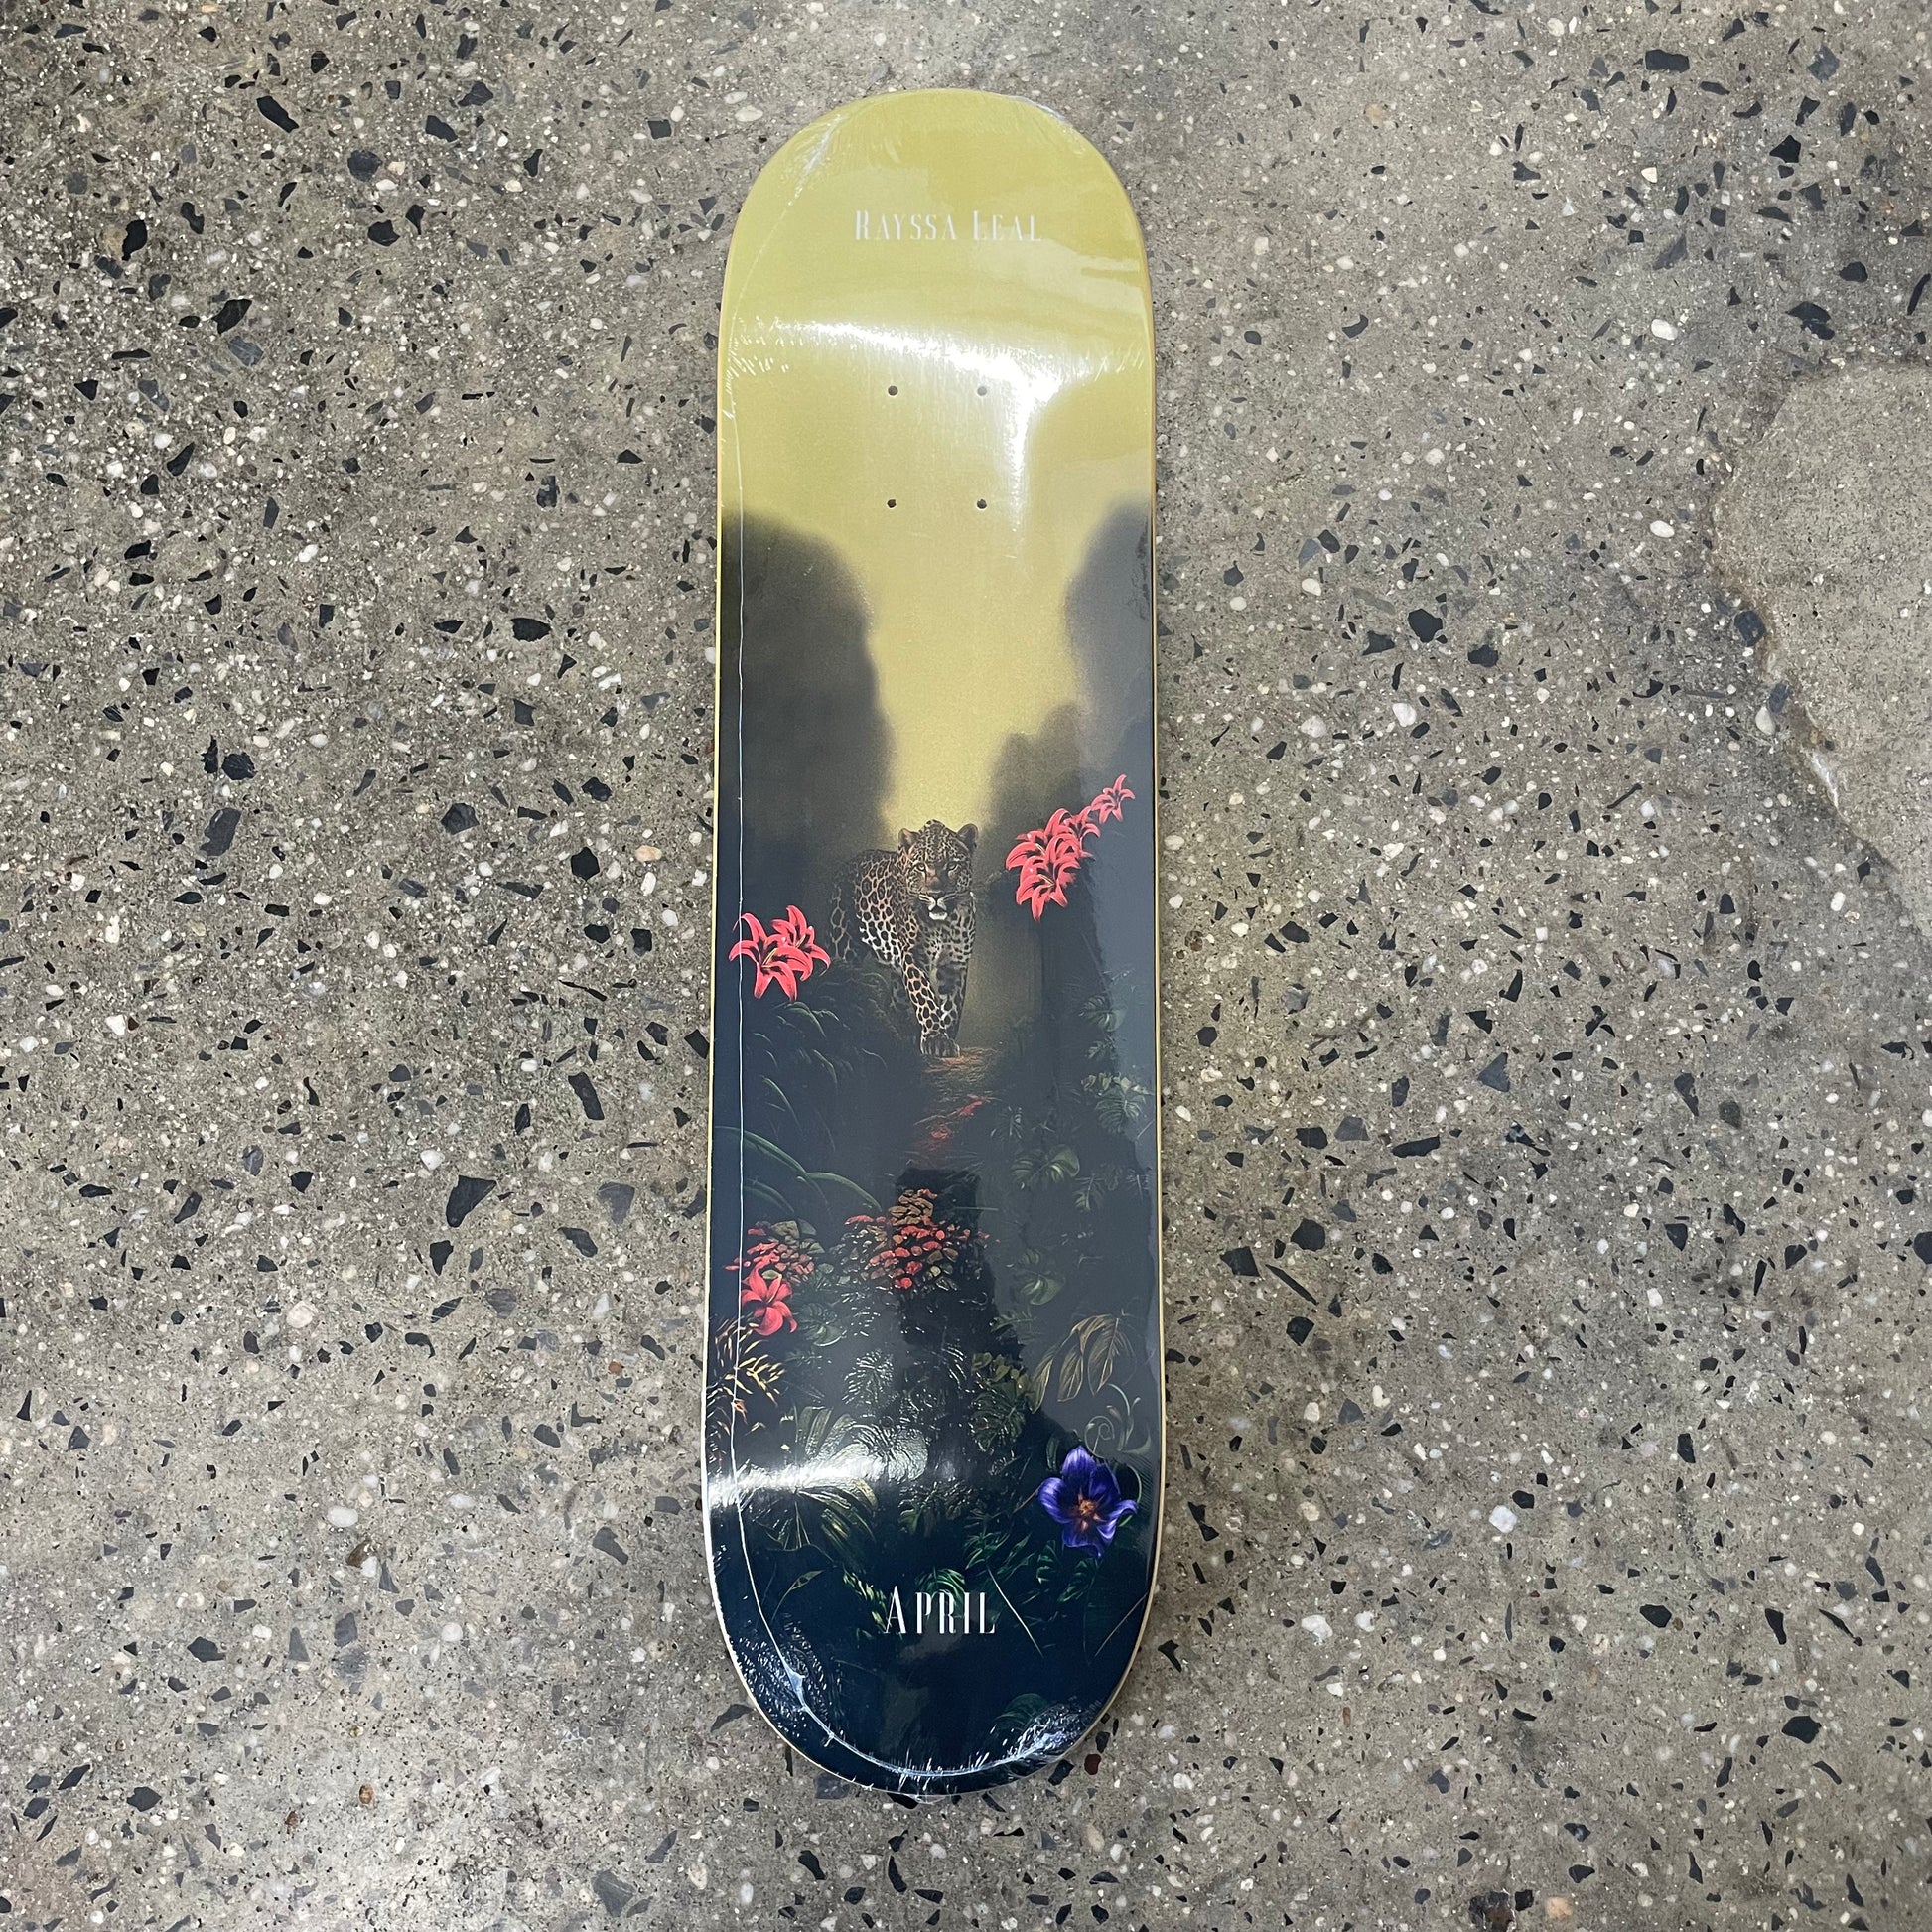 cheetah and multicolored flowers on yellow and black skate deck